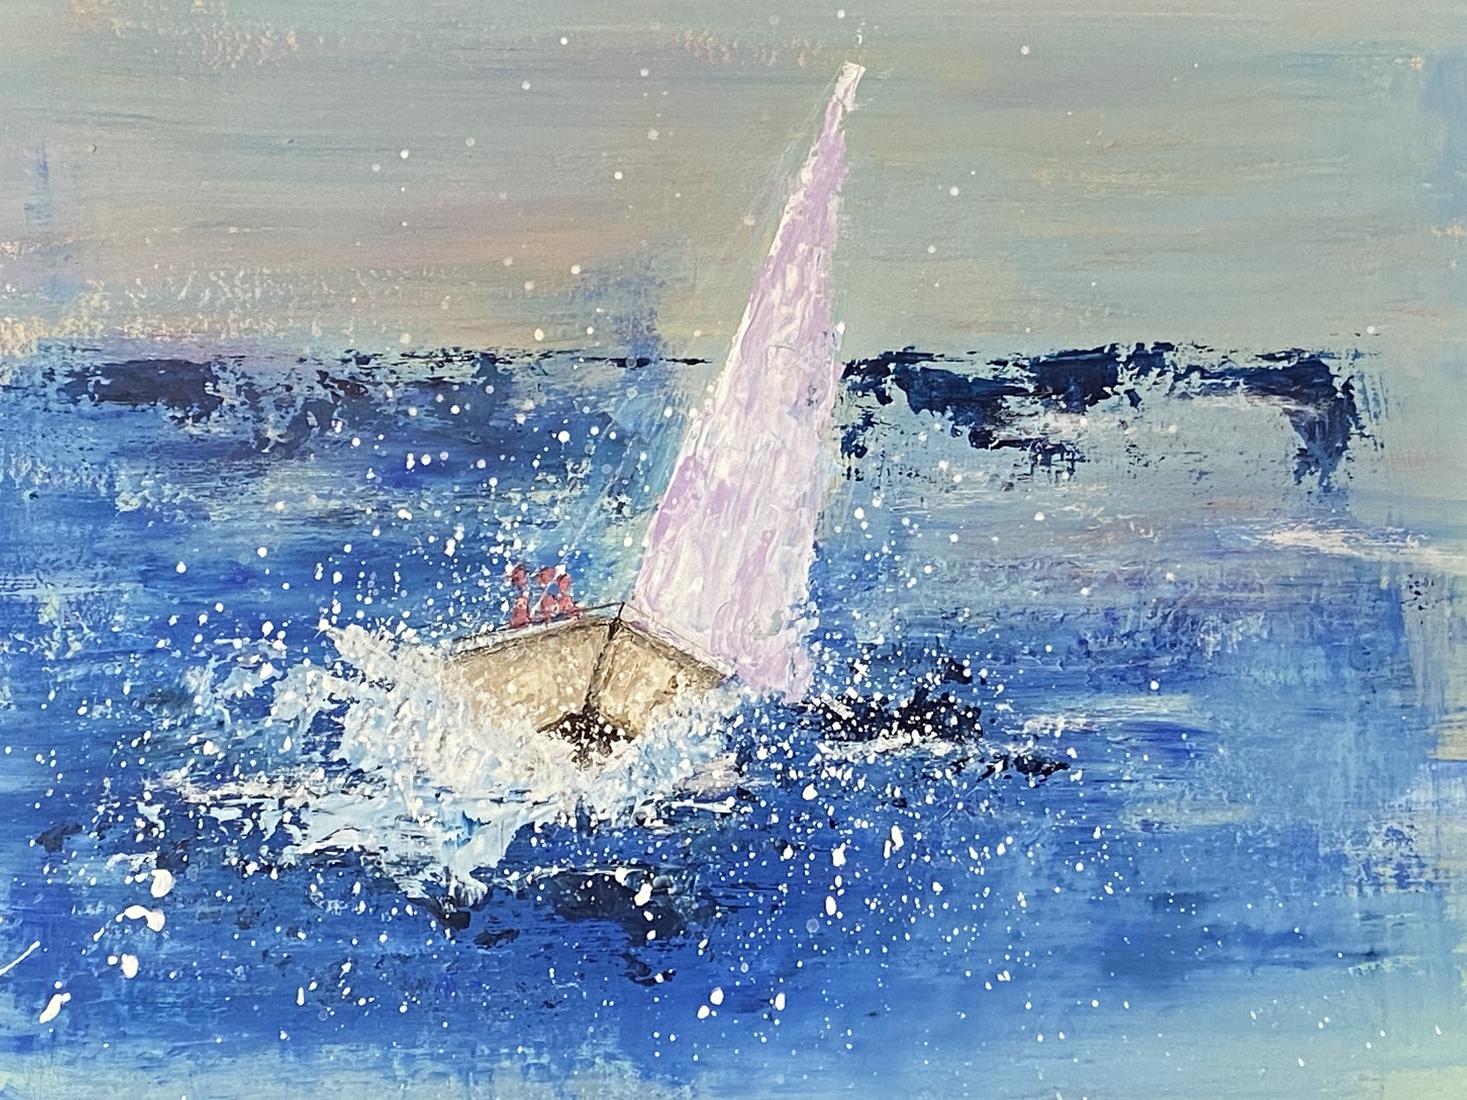 Sailing on a stormy day